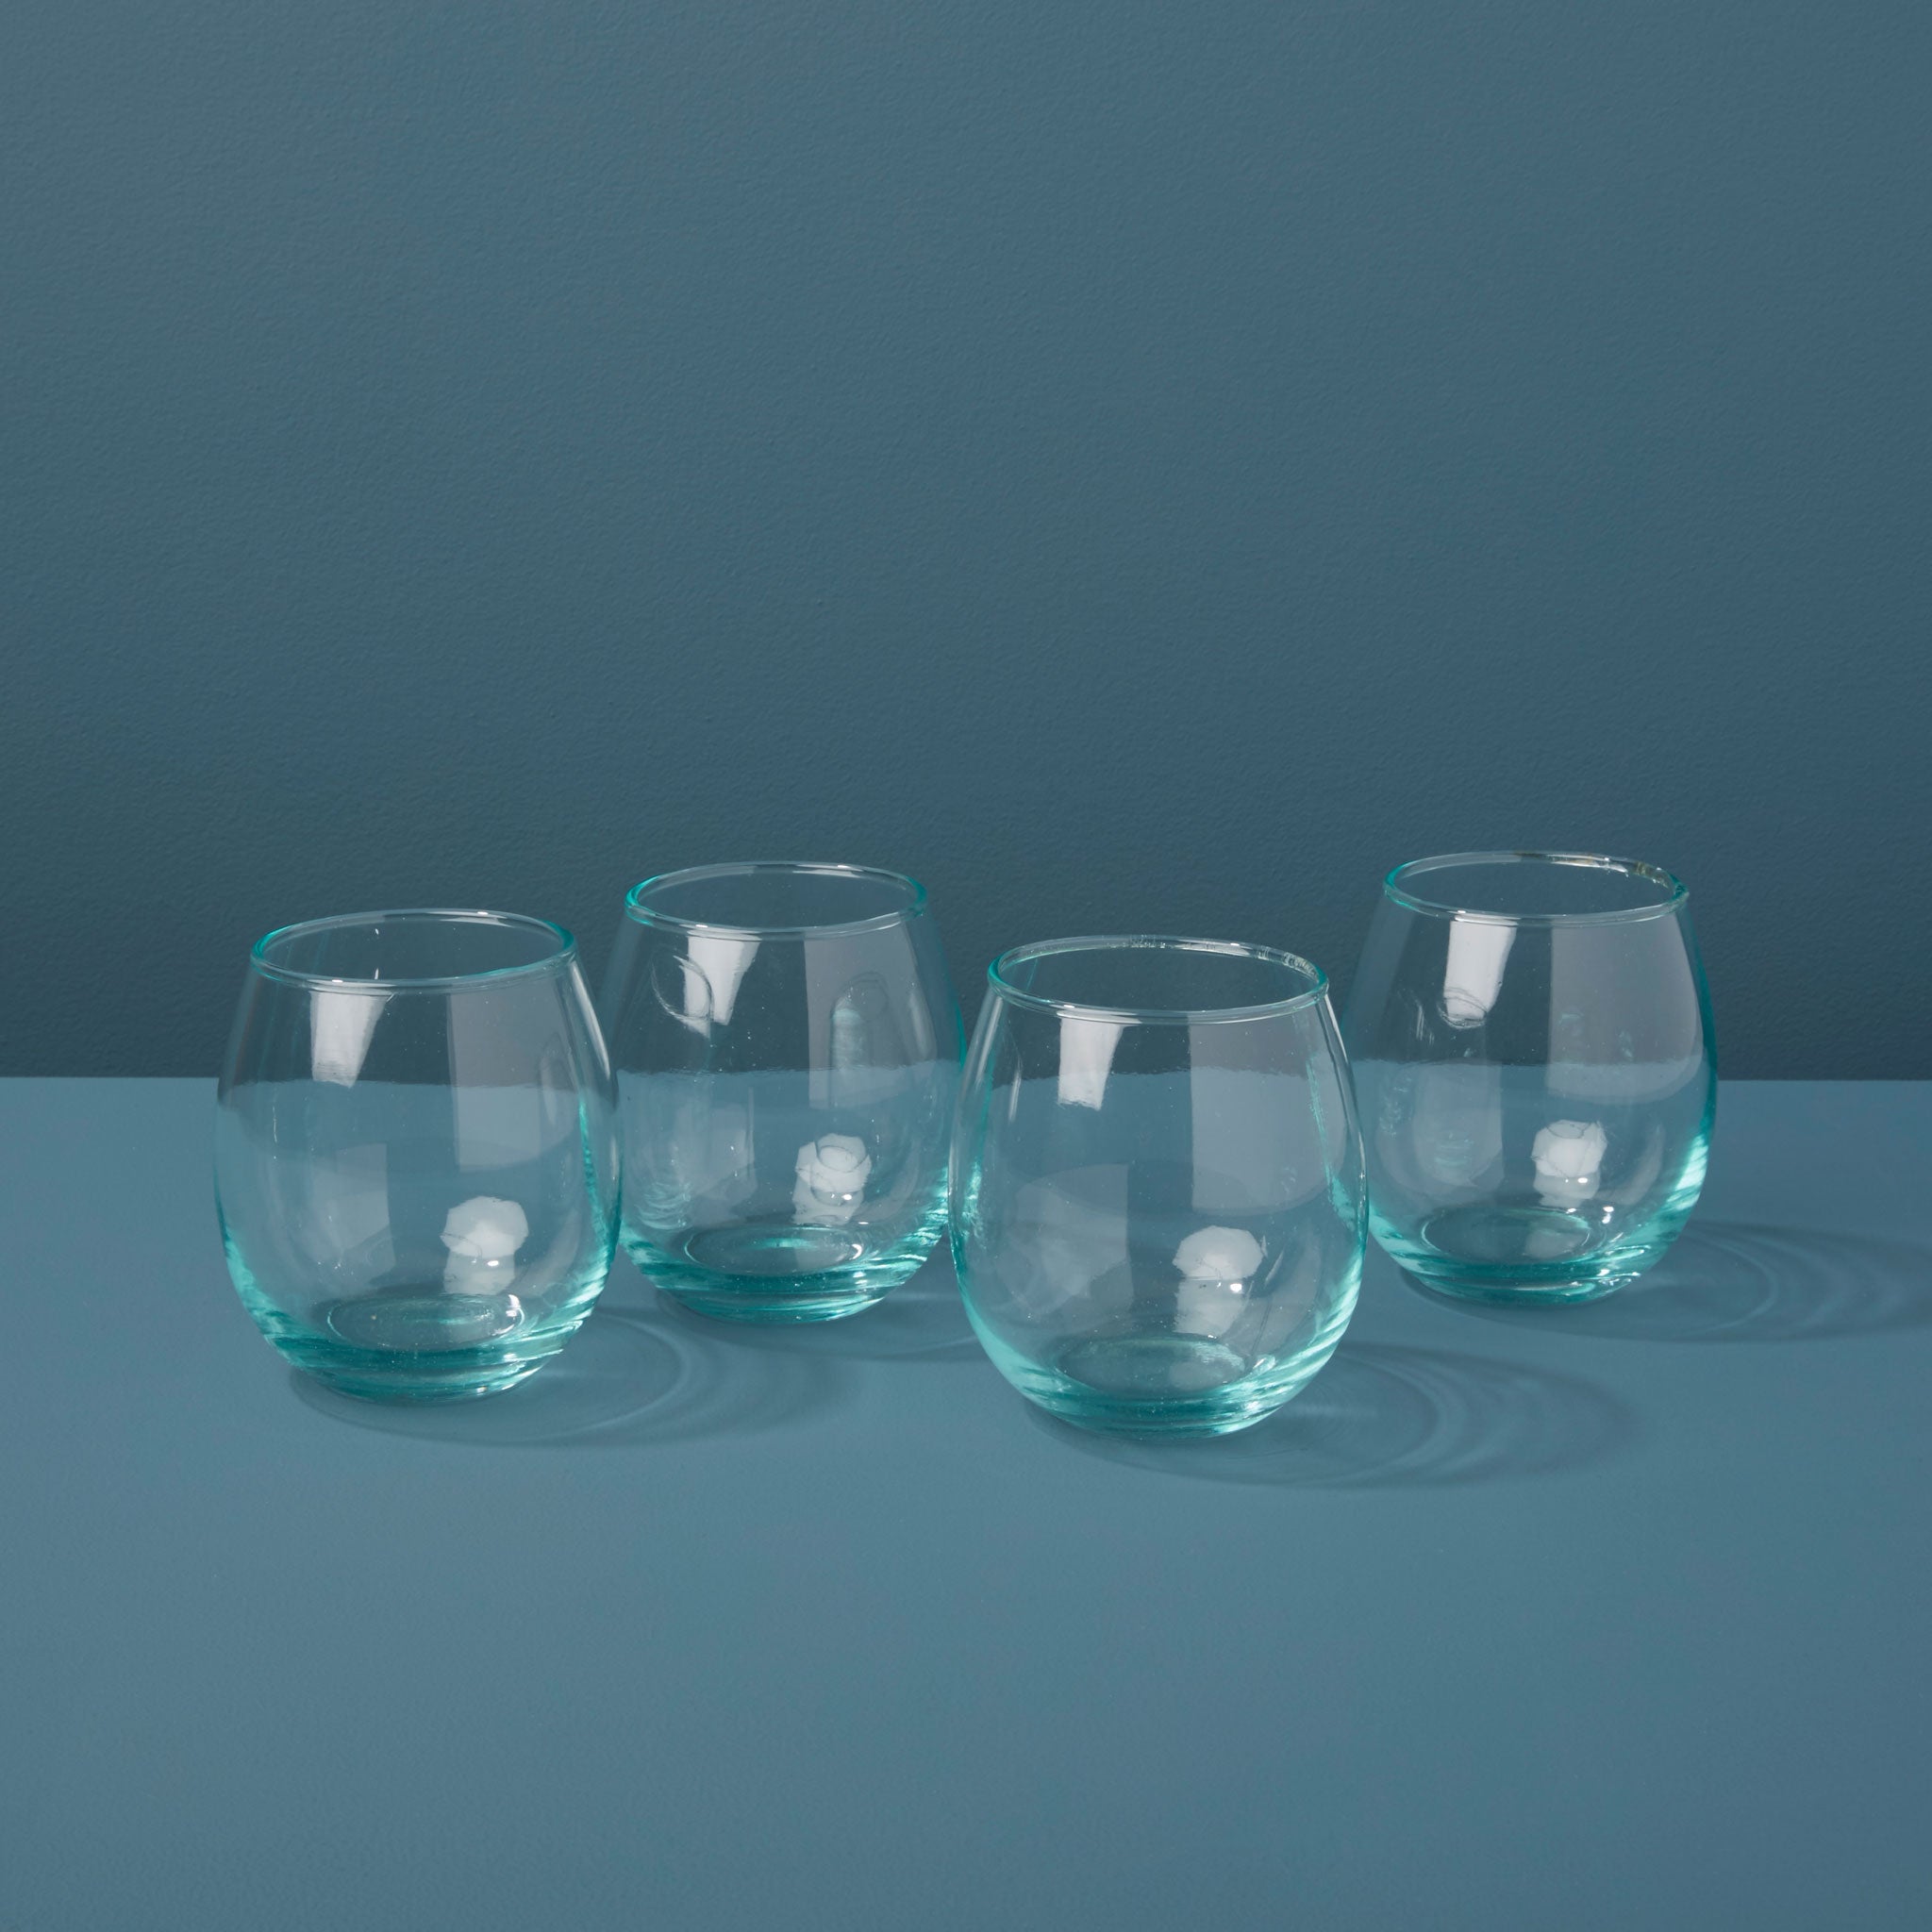 https://behome.com/cdn/shop/products/Be-Home_Recycled-Glass-Stemless-Balloon_46-37_d23be863-0342-4004-a52a-8d89b930f324.jpg?v=1684825021&width=3840